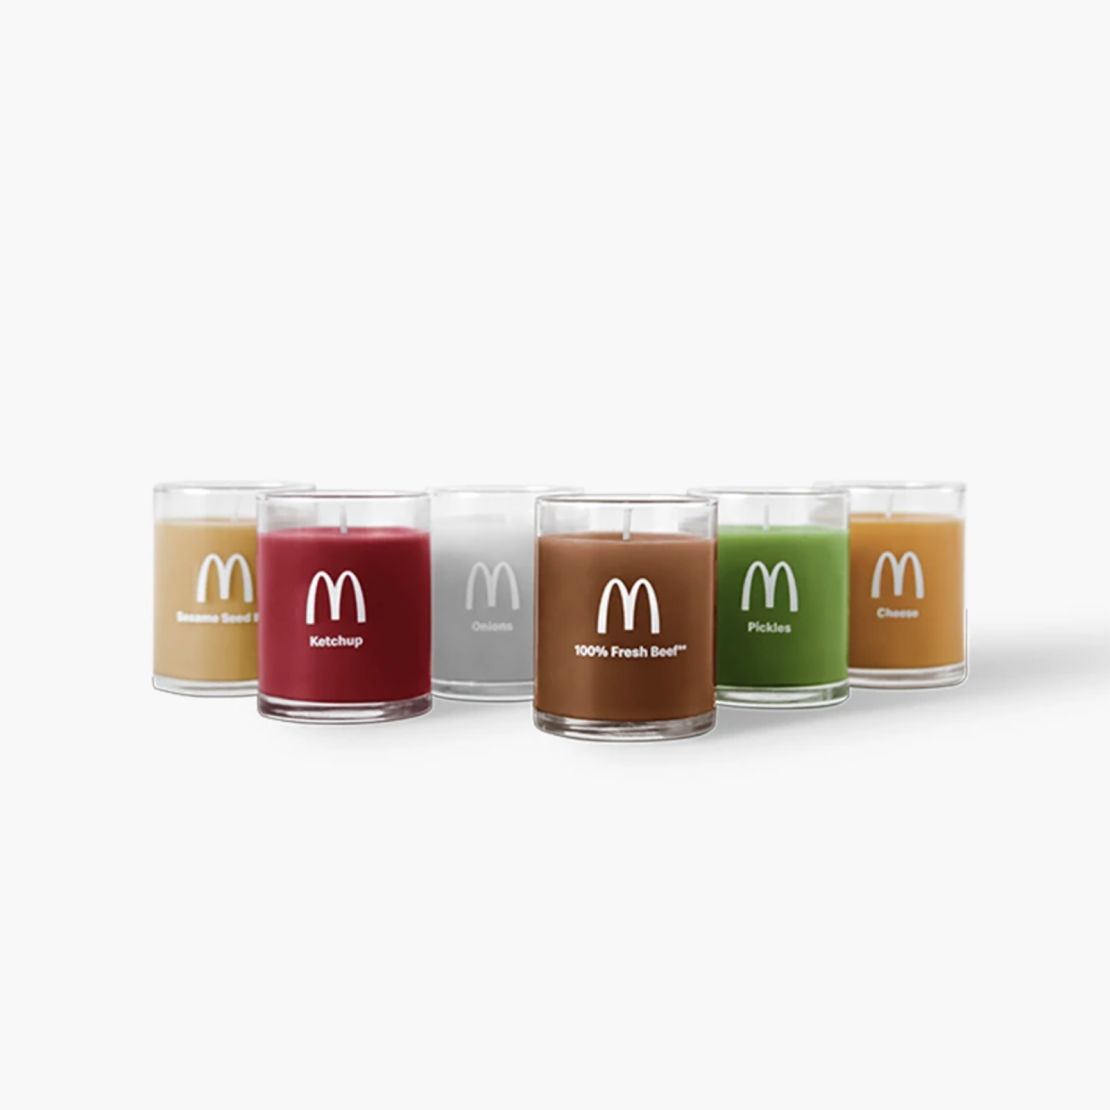 McDonald's six candles come in all the scents you'd expect.